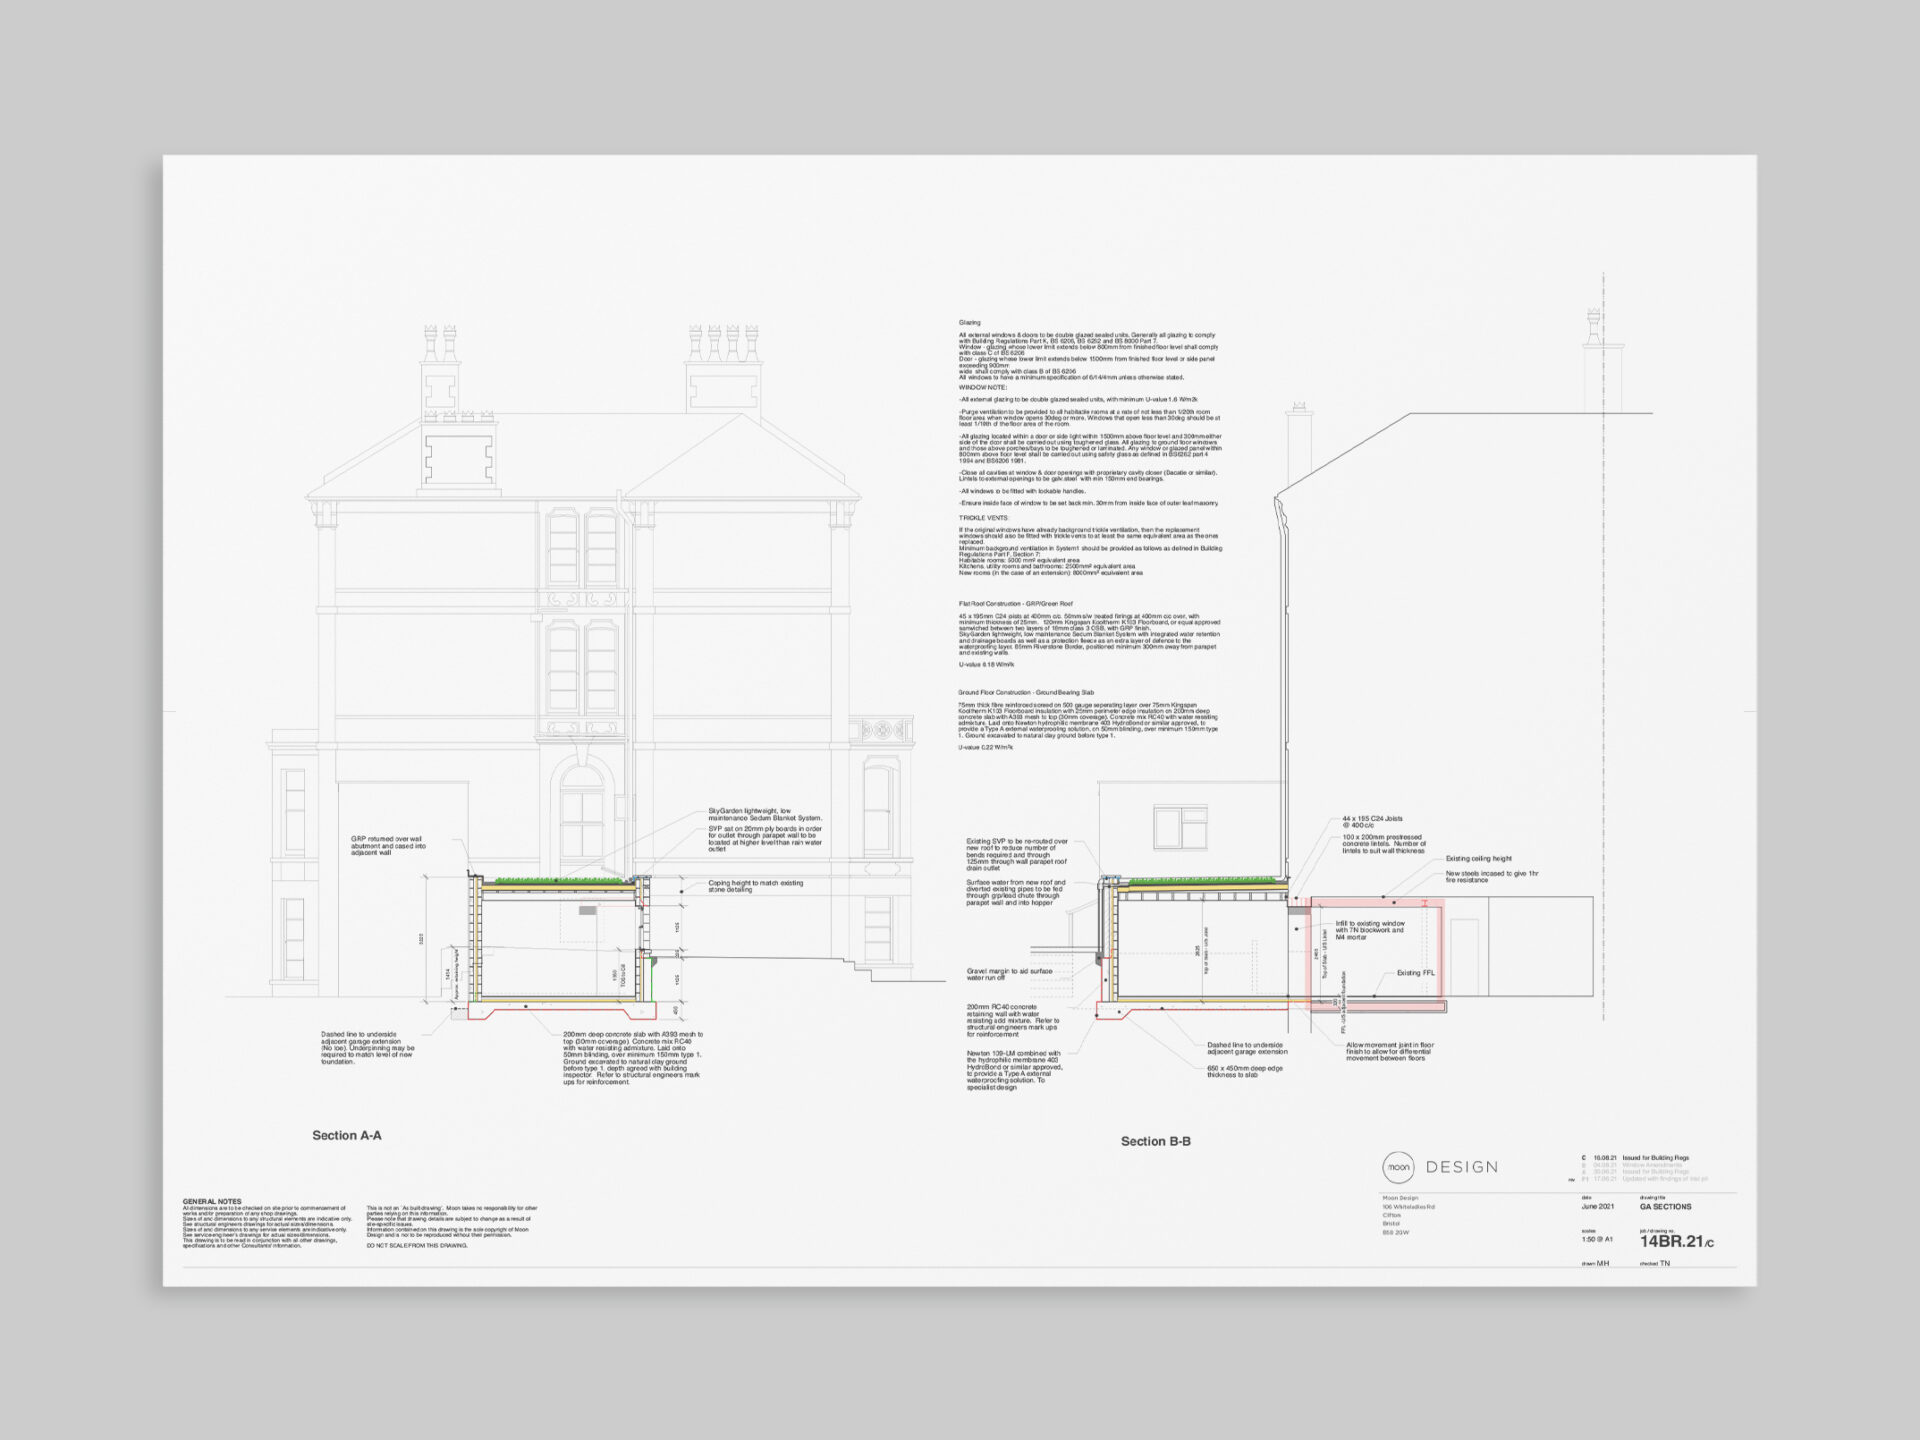 Building regulations section drawings